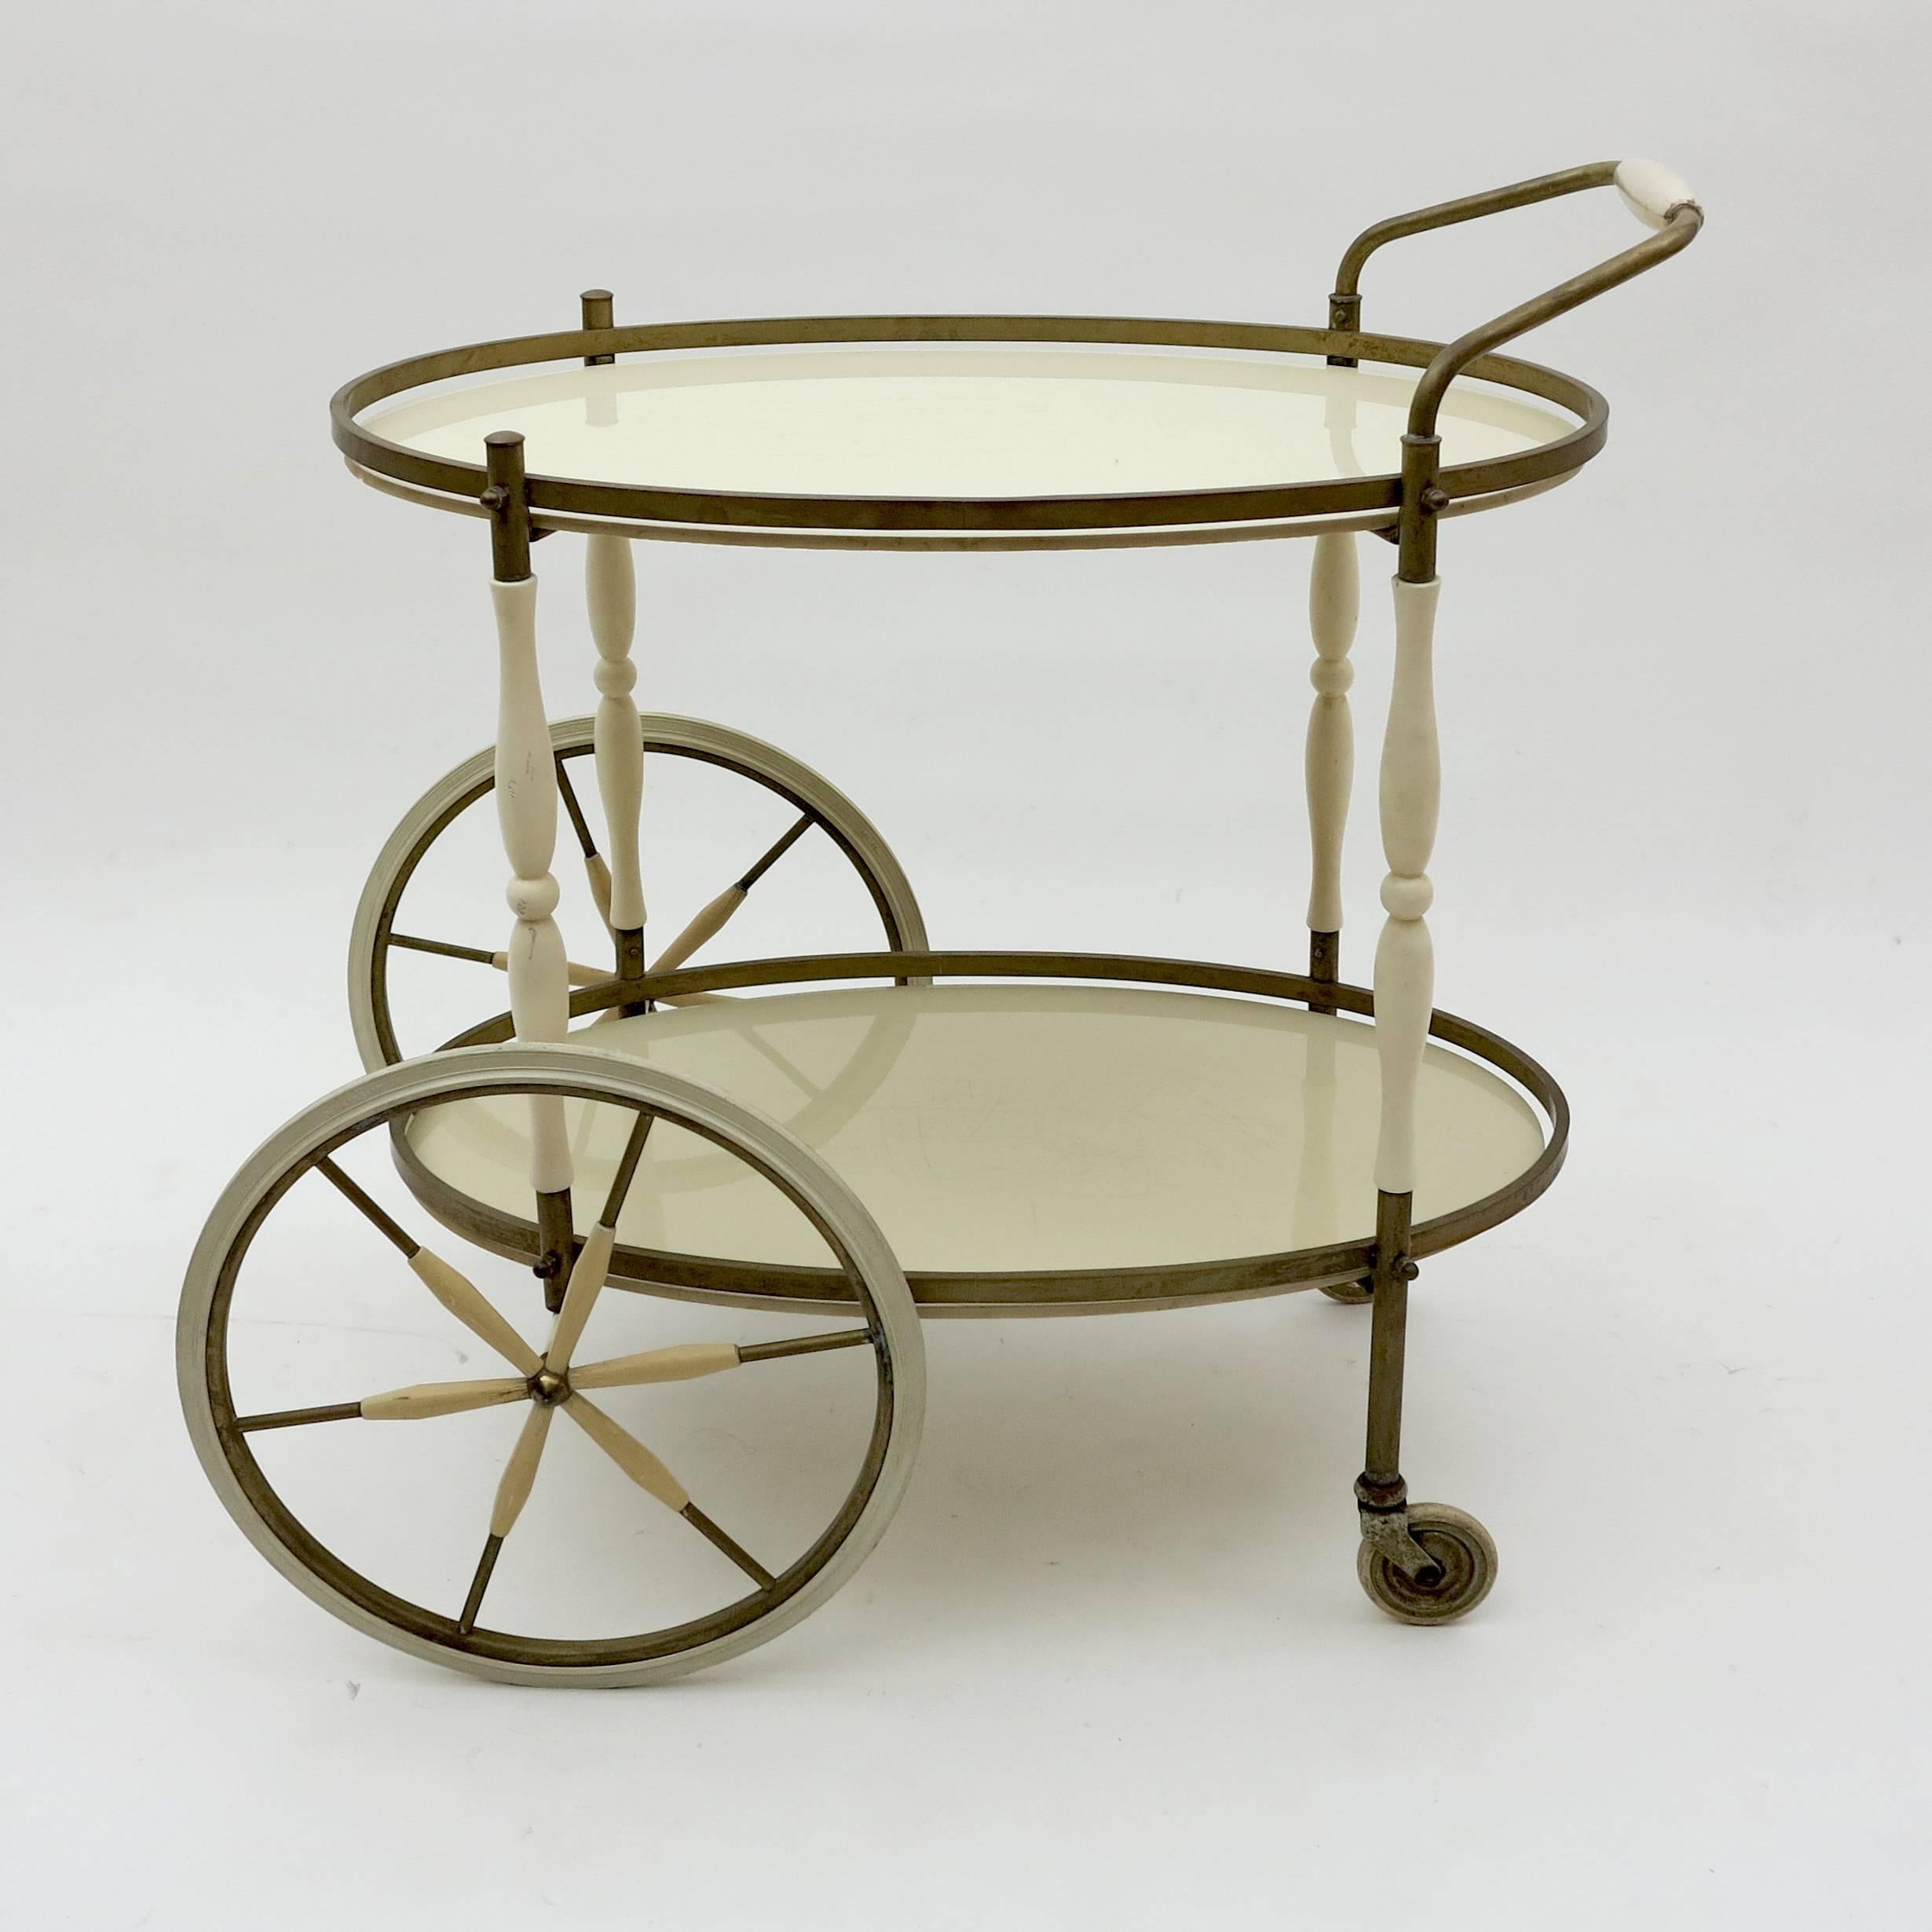 This unique and elegant trolley has two white glass shelves on a bronze and wood structure, with a pair of large wheels and two small balancing wheels at the back for easy movement. Perfect for serving in a party!